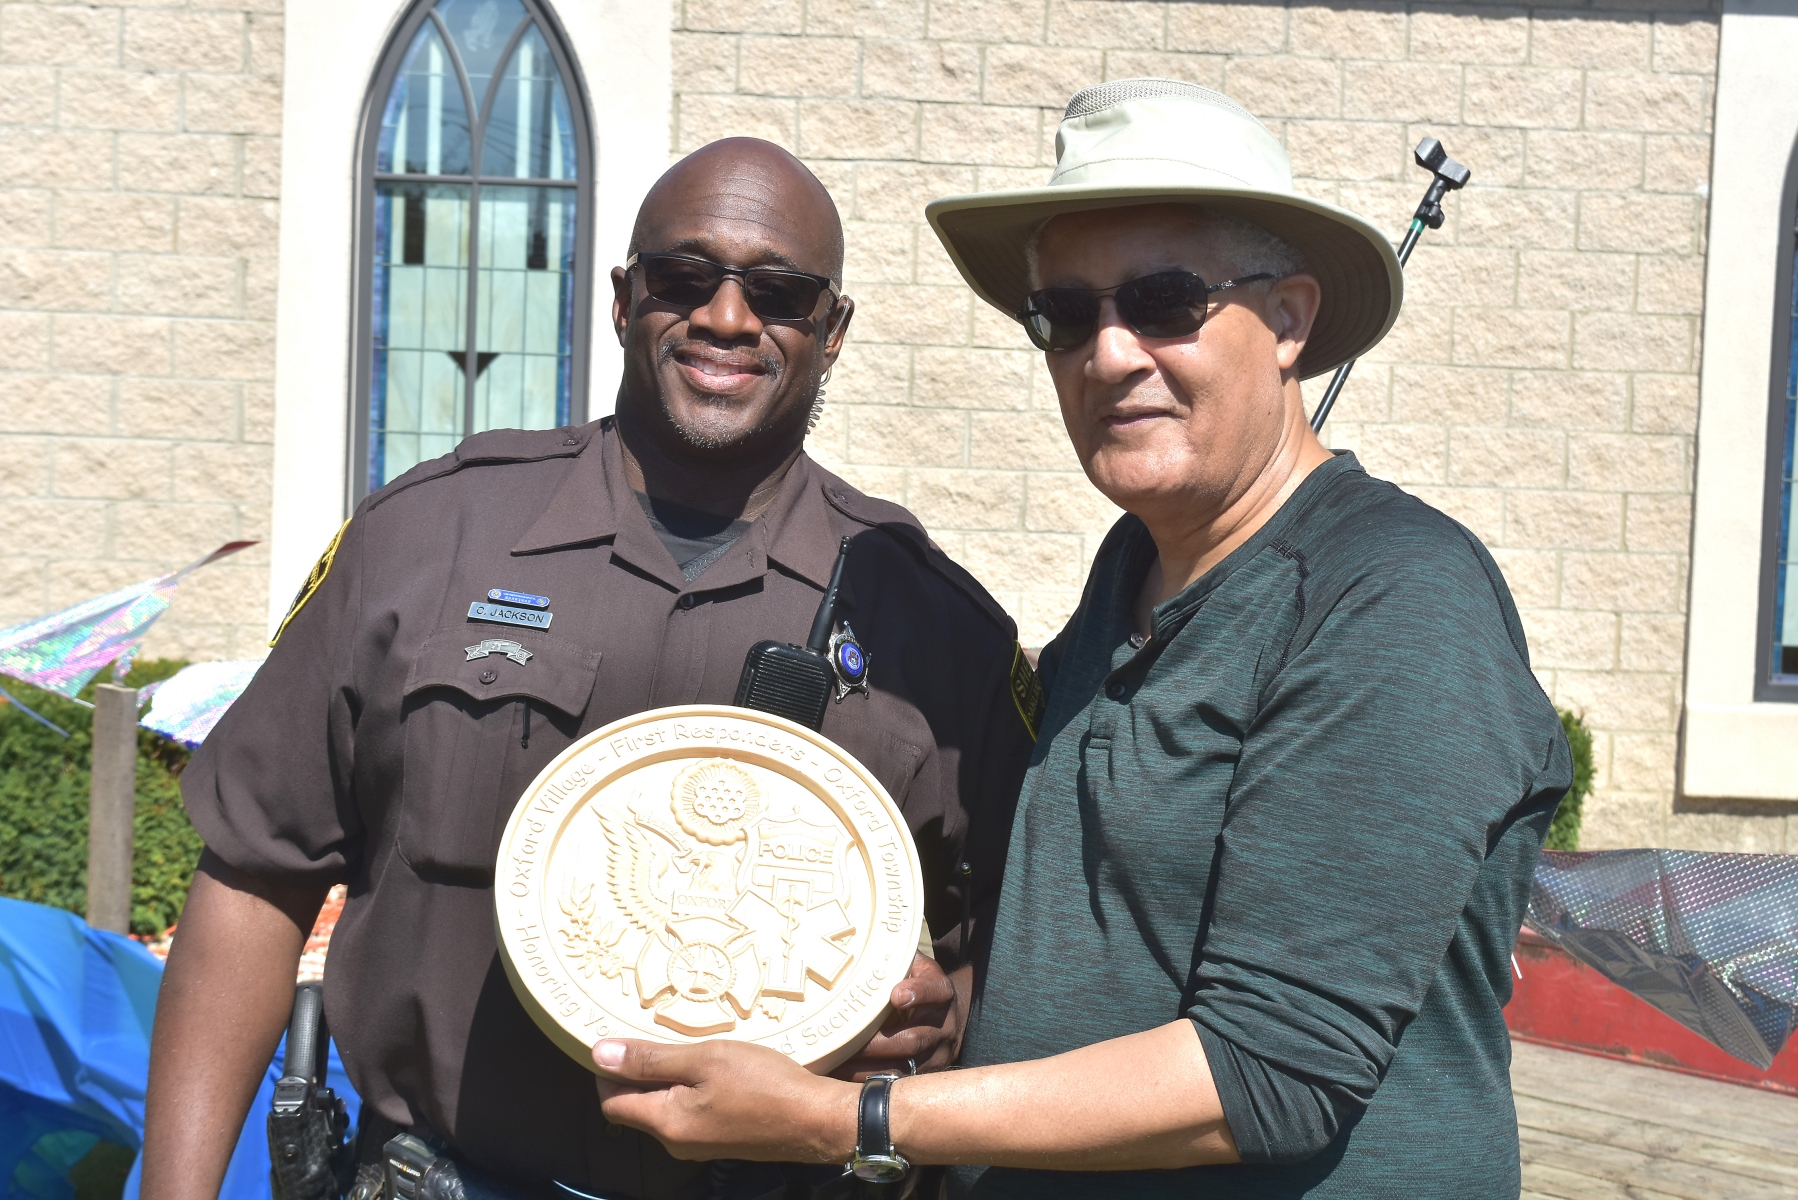 On-behalf-of-Oxford’s-sheriff-substation-Officer-Cary-Jackson-accepts-an-engraved-plaque-from-Oxford-UMC-pastor-Julius-E.-Del-Pino.-Photo-by-J.-Hanlon.